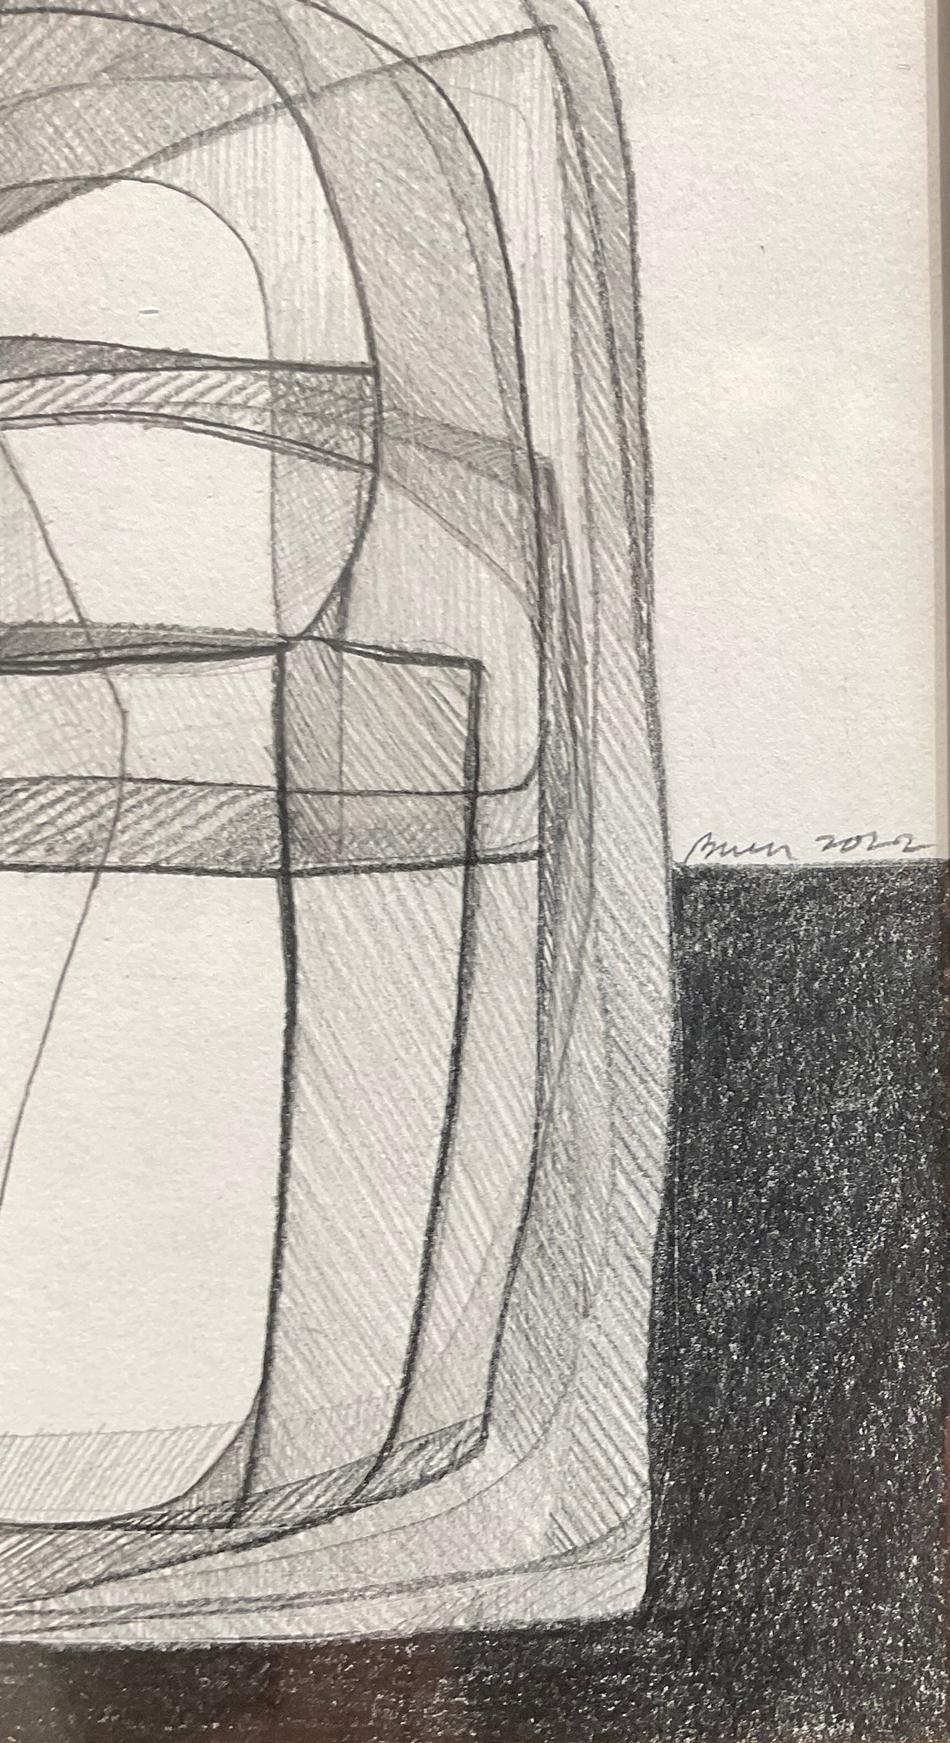 Abstract cubist style still life graphite drawing inspired by Giorgio Morandi's bottle paintings 
“Single Morandi Bottle VIII” by Hudson Valley artist, David Dew Bruner, made in 2022
Graphite on paper in an antique Rococo frame
Sight dimensions: 12